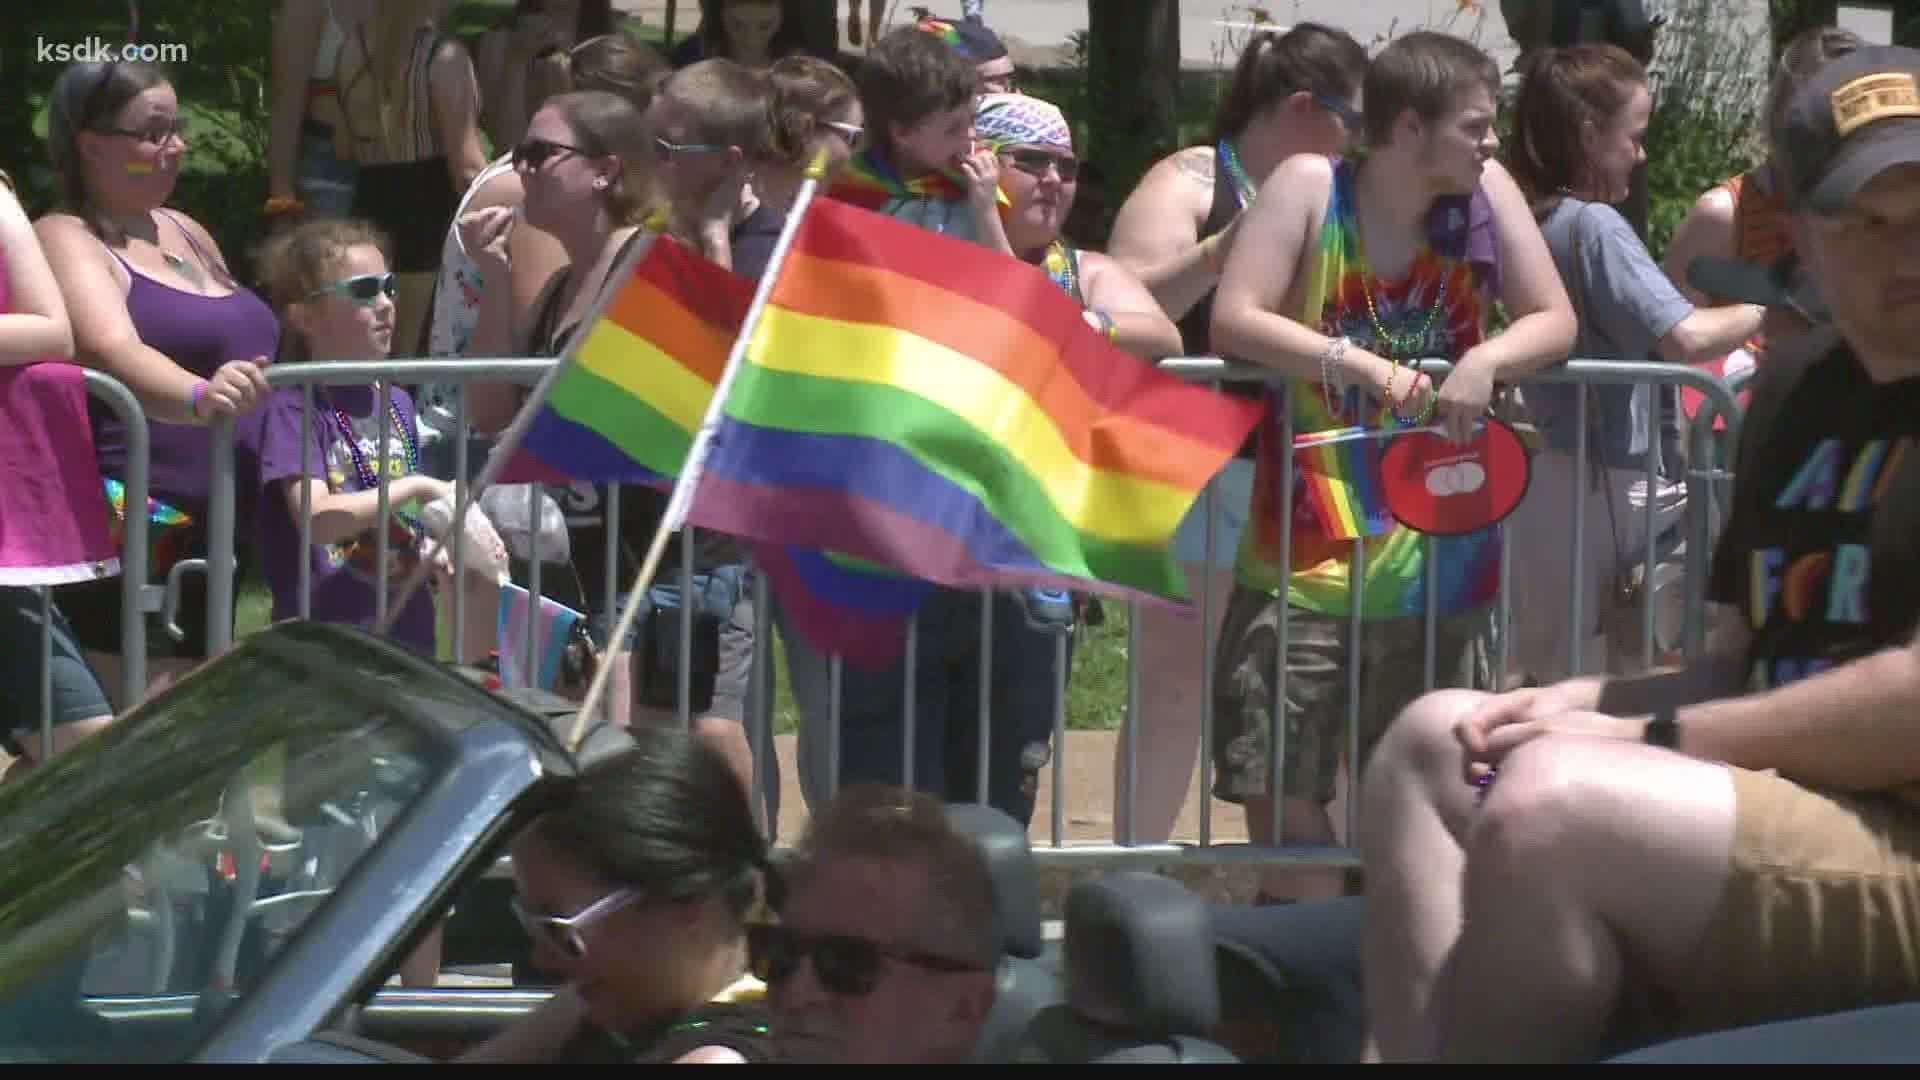 Pride St. Louis was unable to obtain necessary permits for the popular event